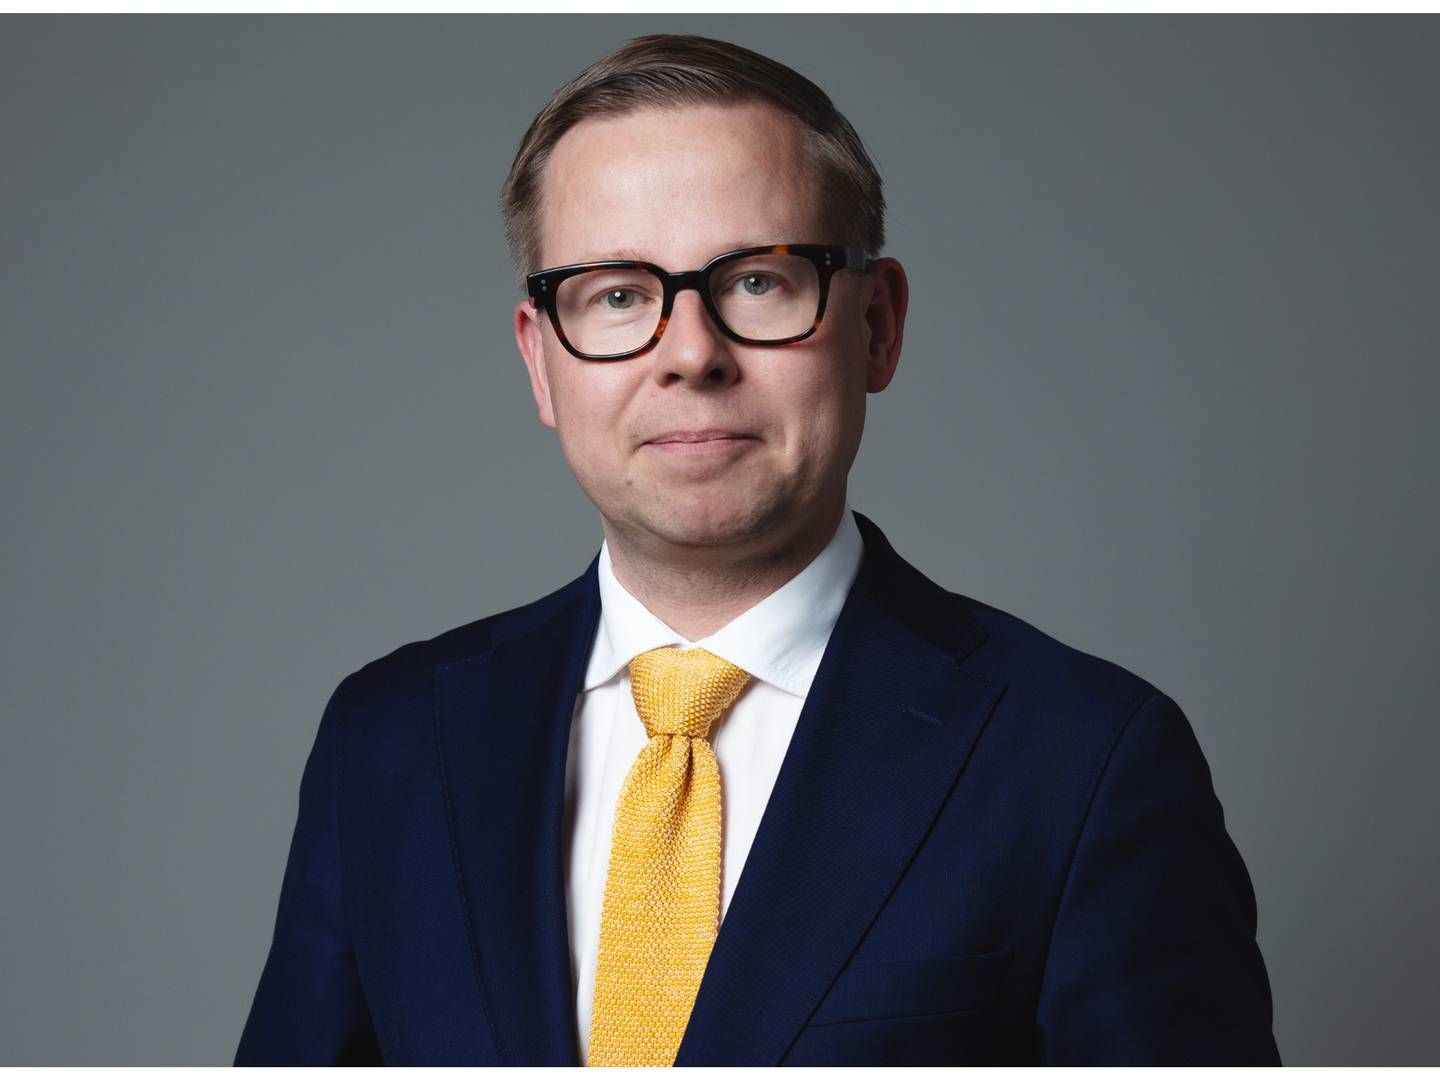 Ilkka Tomperi rejoined CapMan Real Estate in February, after having worked for Finnish construction giant YIT and mutual pensions company Varma for more than nine years collectively. | Photo: PR / Capman